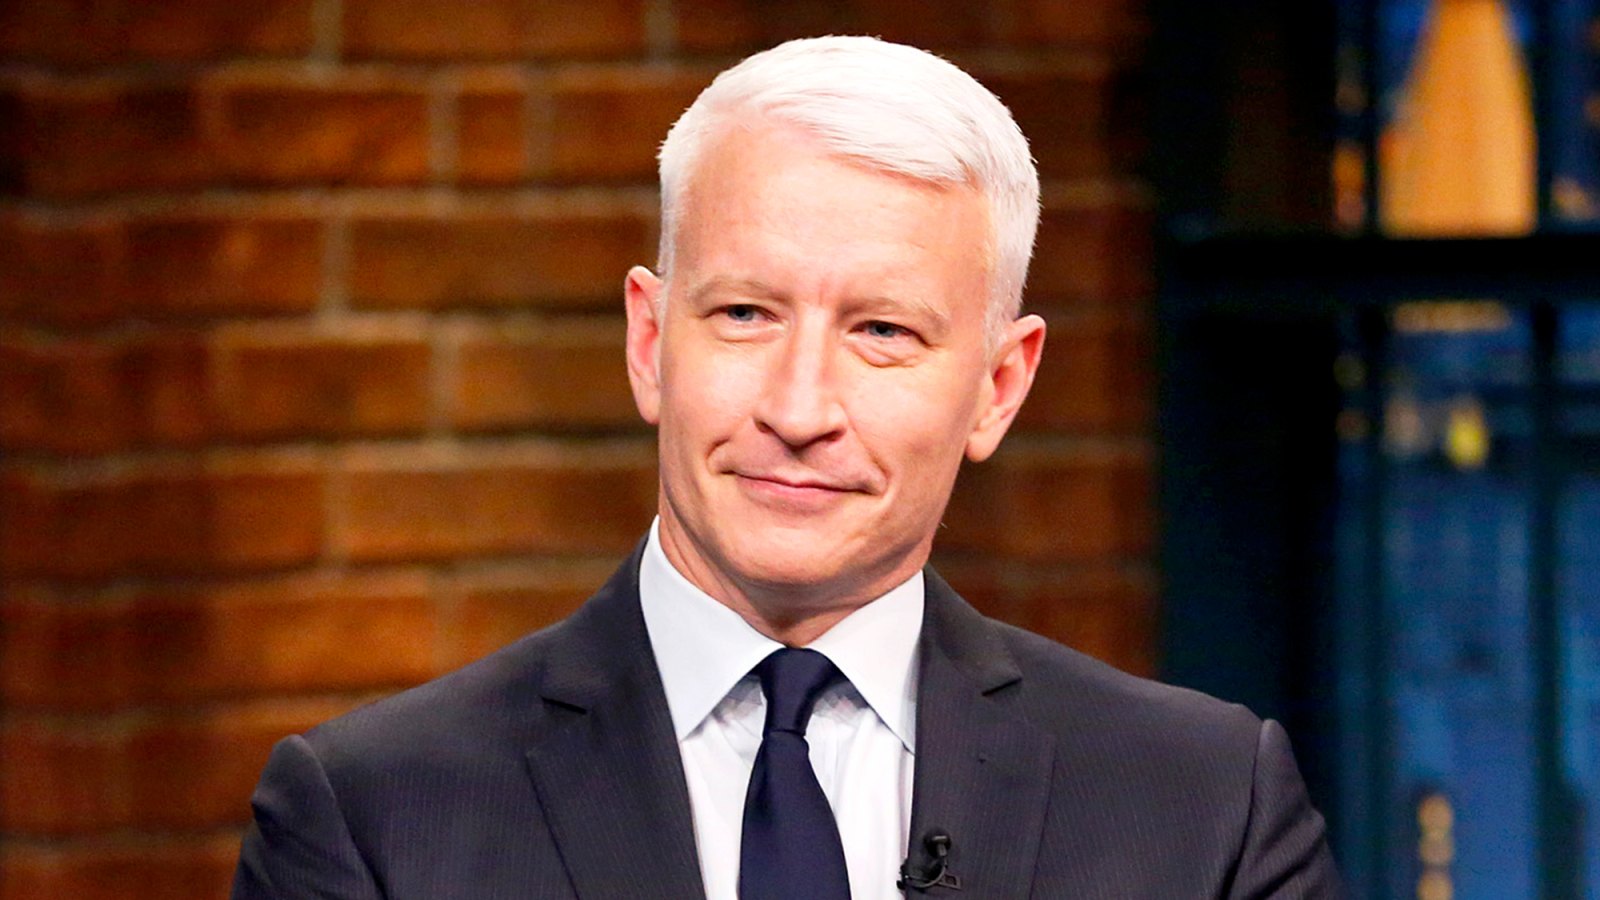 Anderson Cooper on ‘Late Night with Seth Meyers‘